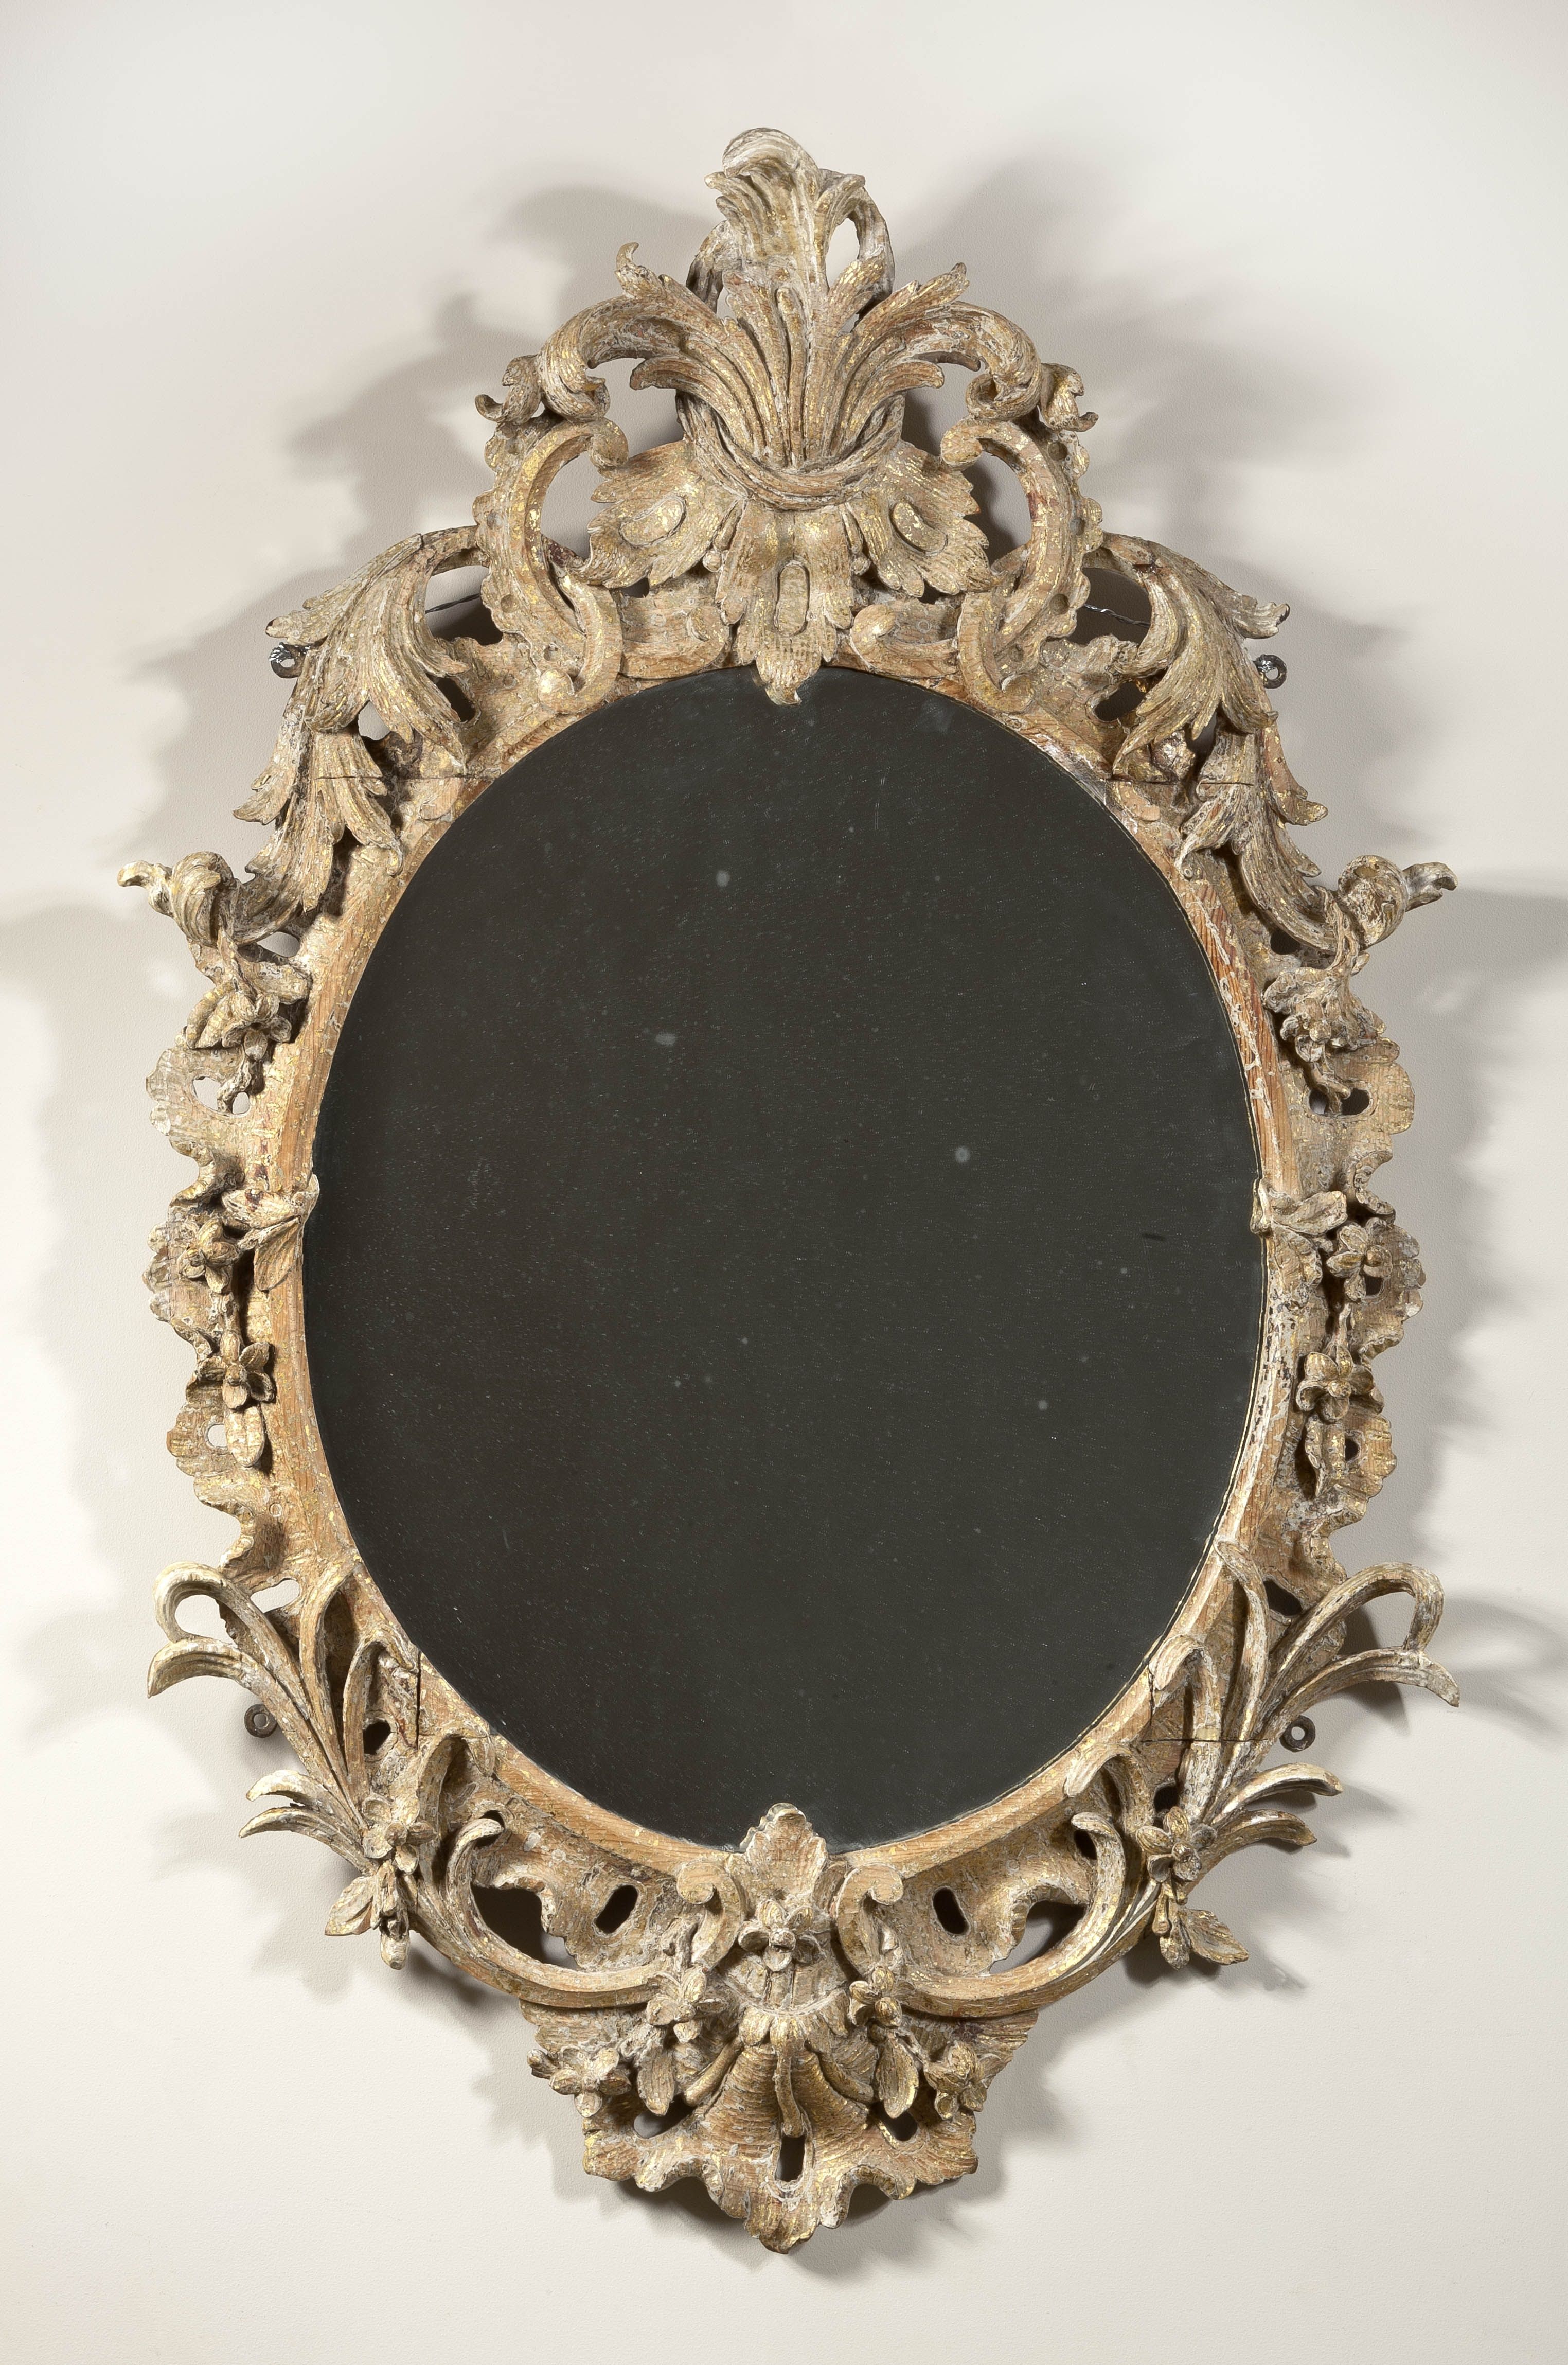 A Transitional Baroque And Rococo Mirror Clinton Howell In Rococo Mirror (View 9 of 15)